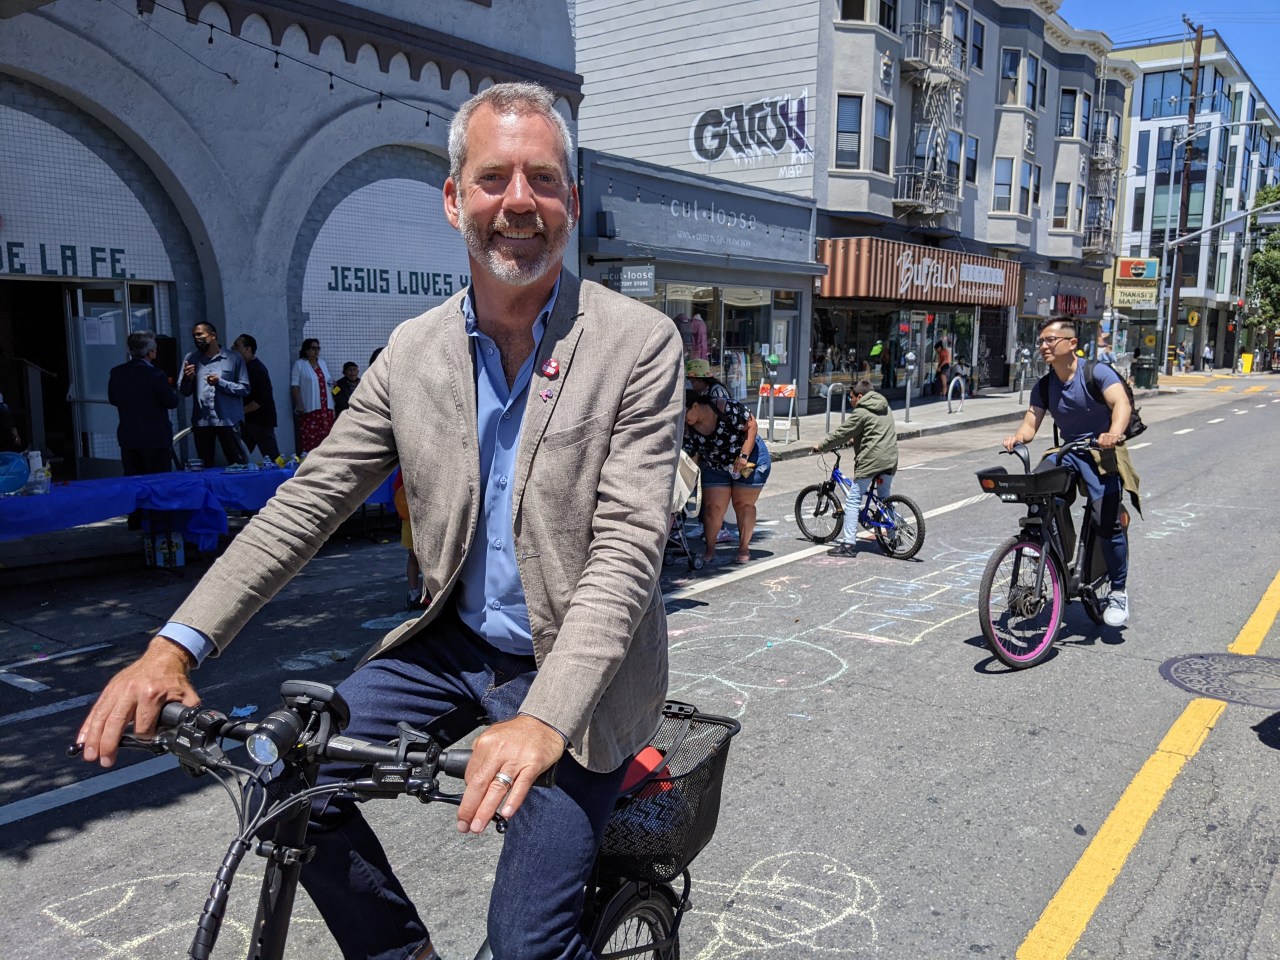 SFMTA's Jeffrey Tumlin at Sunday Streets Valencia last summer. He promised Streetsblog the street would see improvements by the end of the year. It didn't happen. Photo: Streetsblog/Rudick